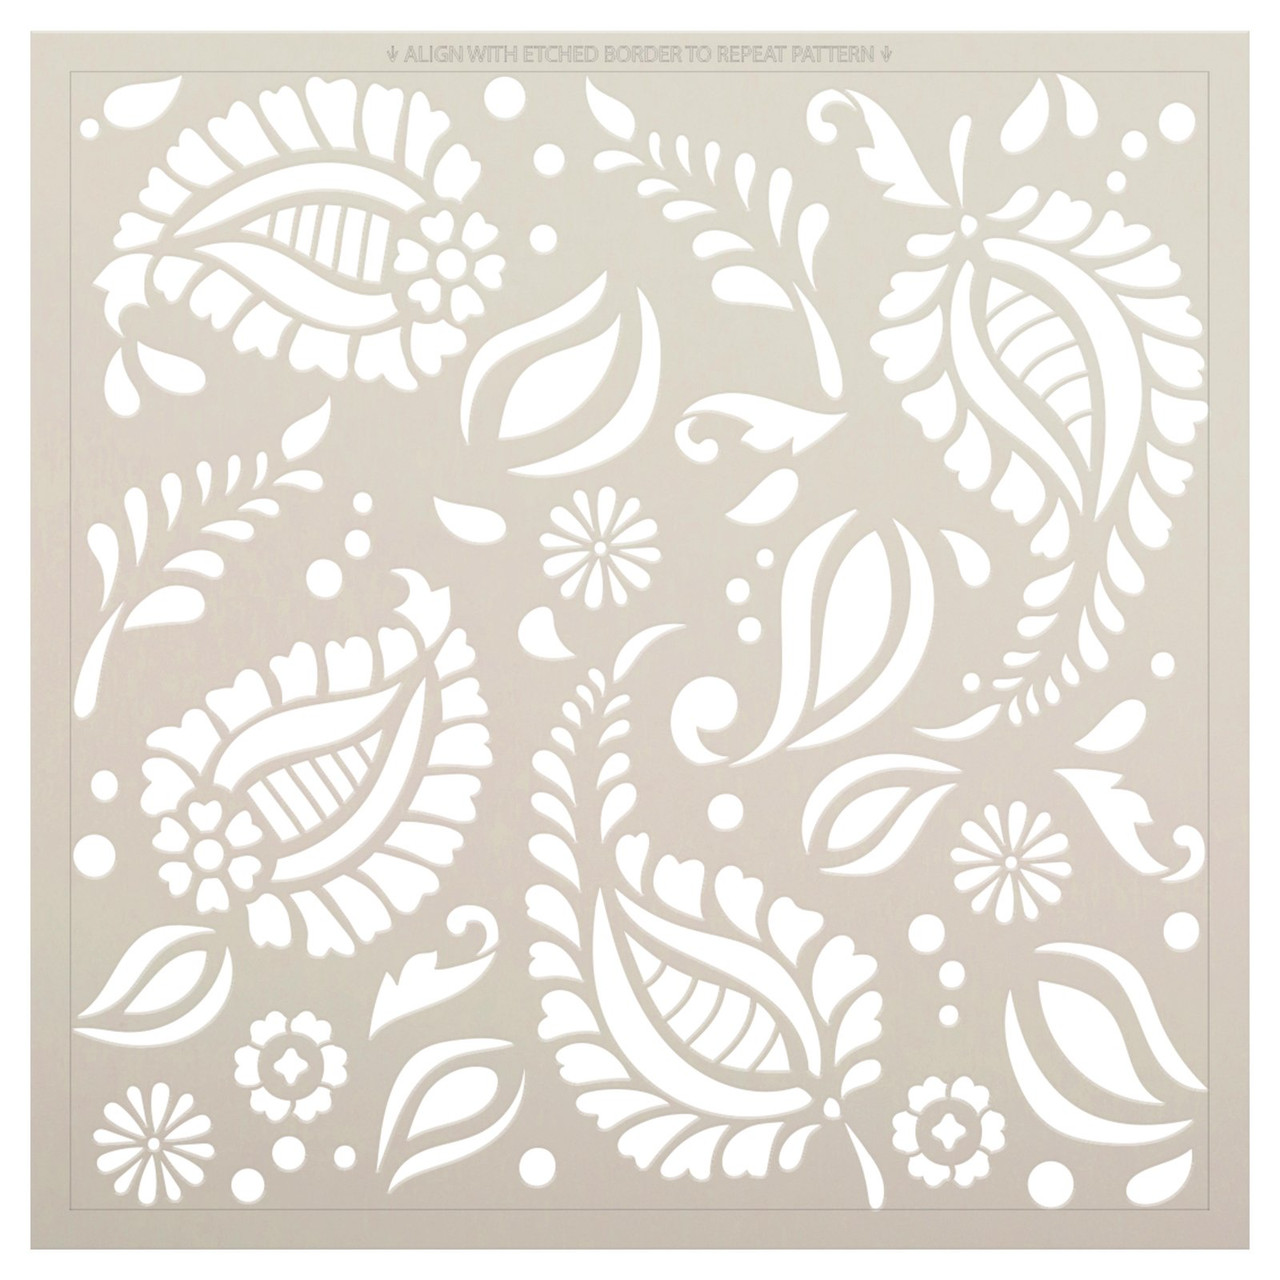 Floral & Leaf Paisley Stencil by StudioR12 | Craft DIY Repeated Pattern Home Decor | Paint Wood Sign | Reusable Mylar Template | Select Size